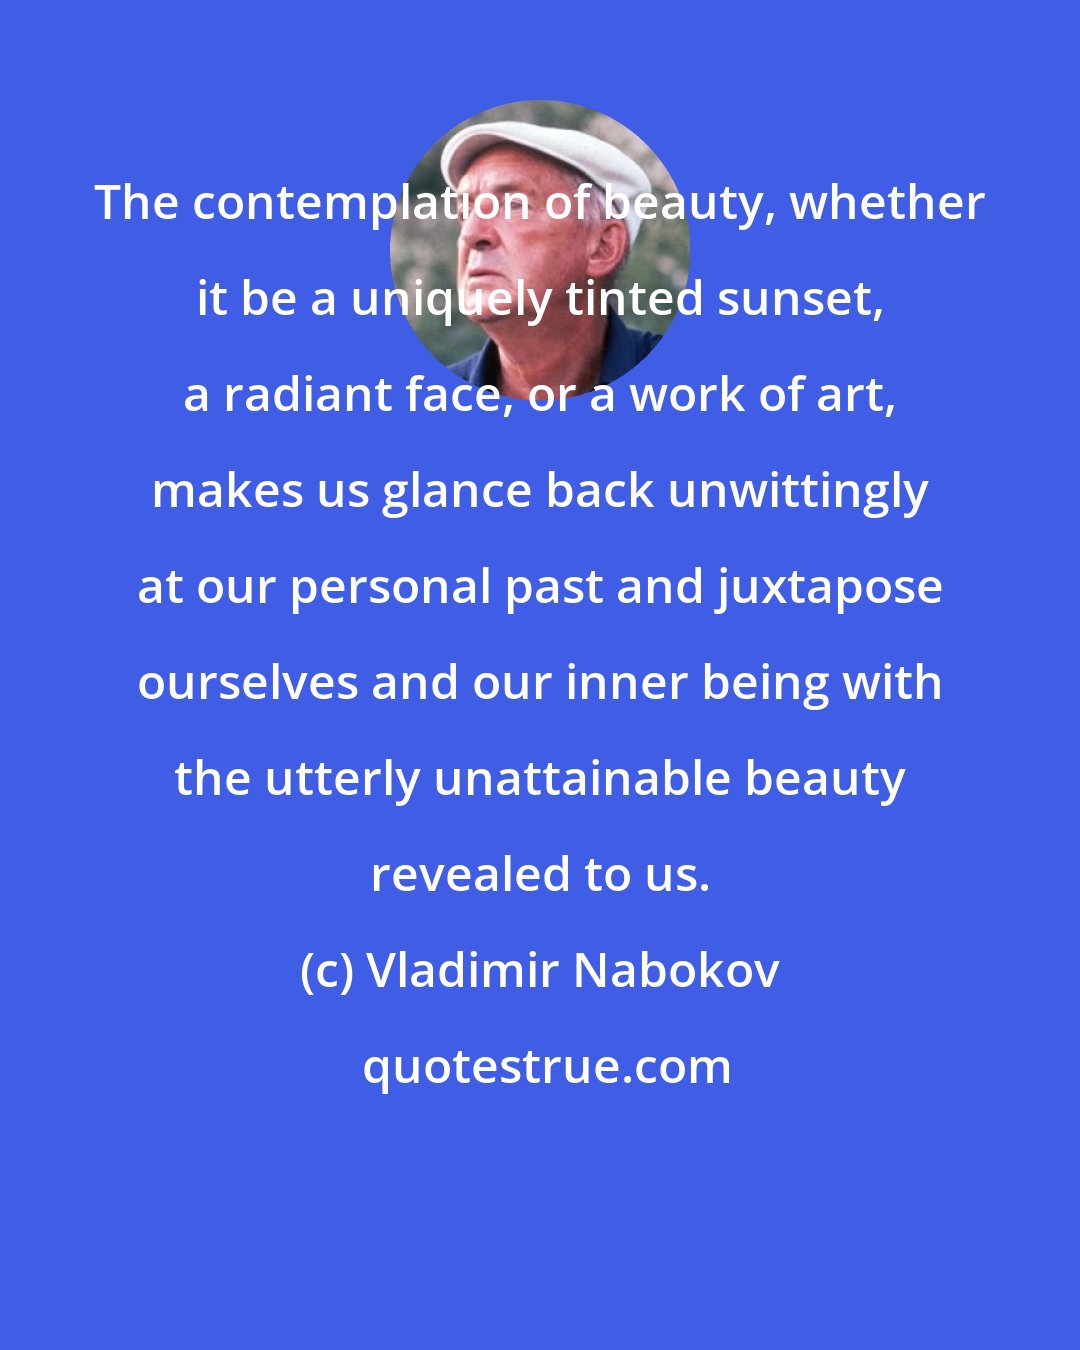 Vladimir Nabokov: The contemplation of beauty, whether it be a uniquely tinted sunset, a radiant face, or a work of art, makes us glance back unwittingly at our personal past and juxtapose ourselves and our inner being with the utterly unattainable beauty revealed to us.